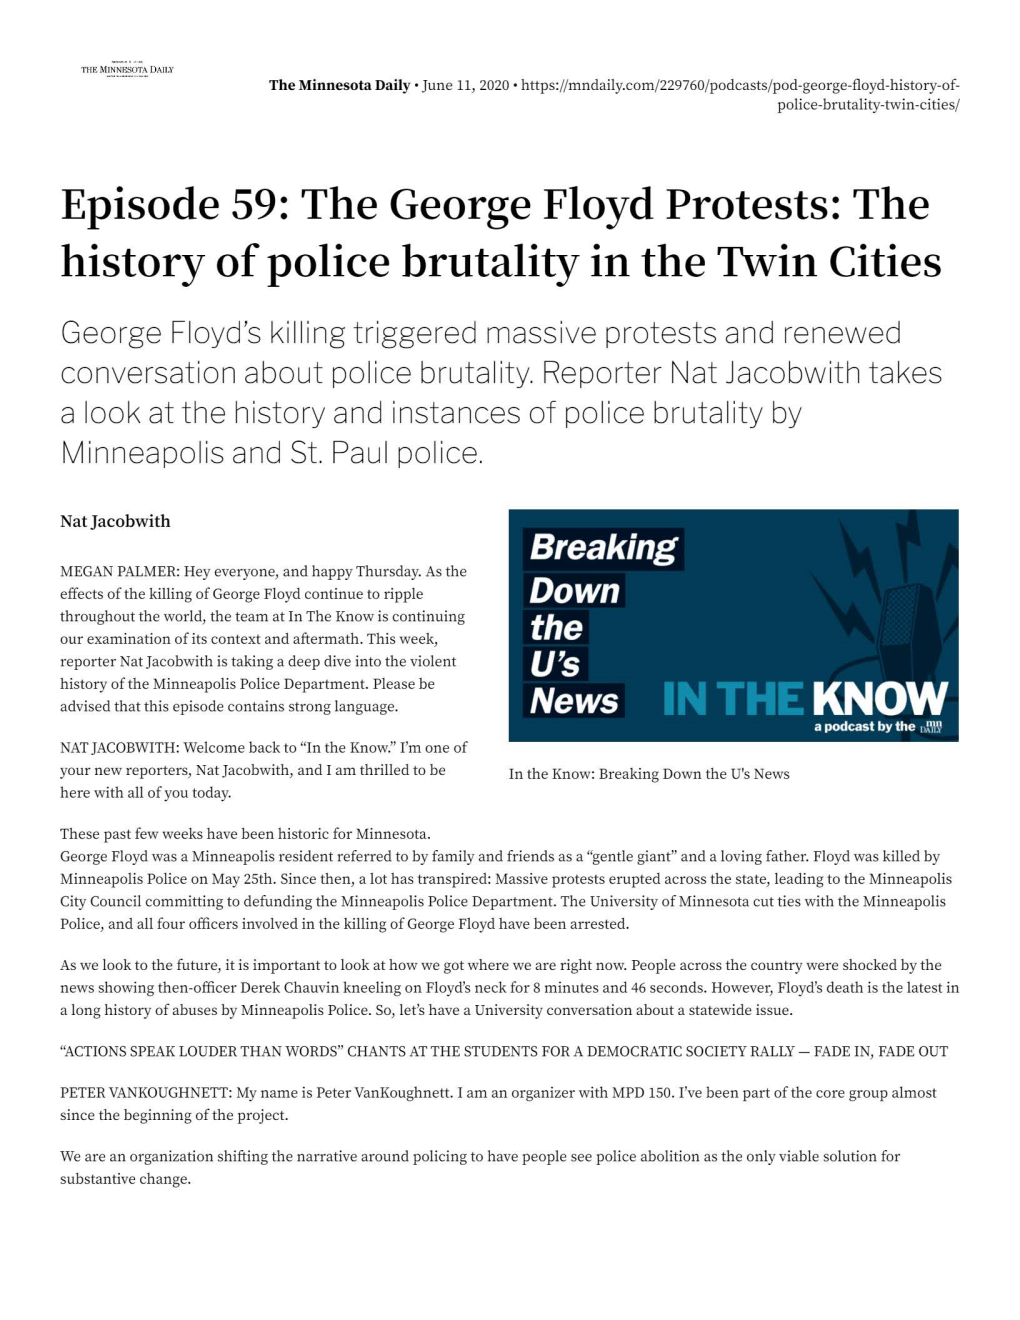 Episode 59: the George Floyd Protests: the History of Police Brutality in the Twin Cities